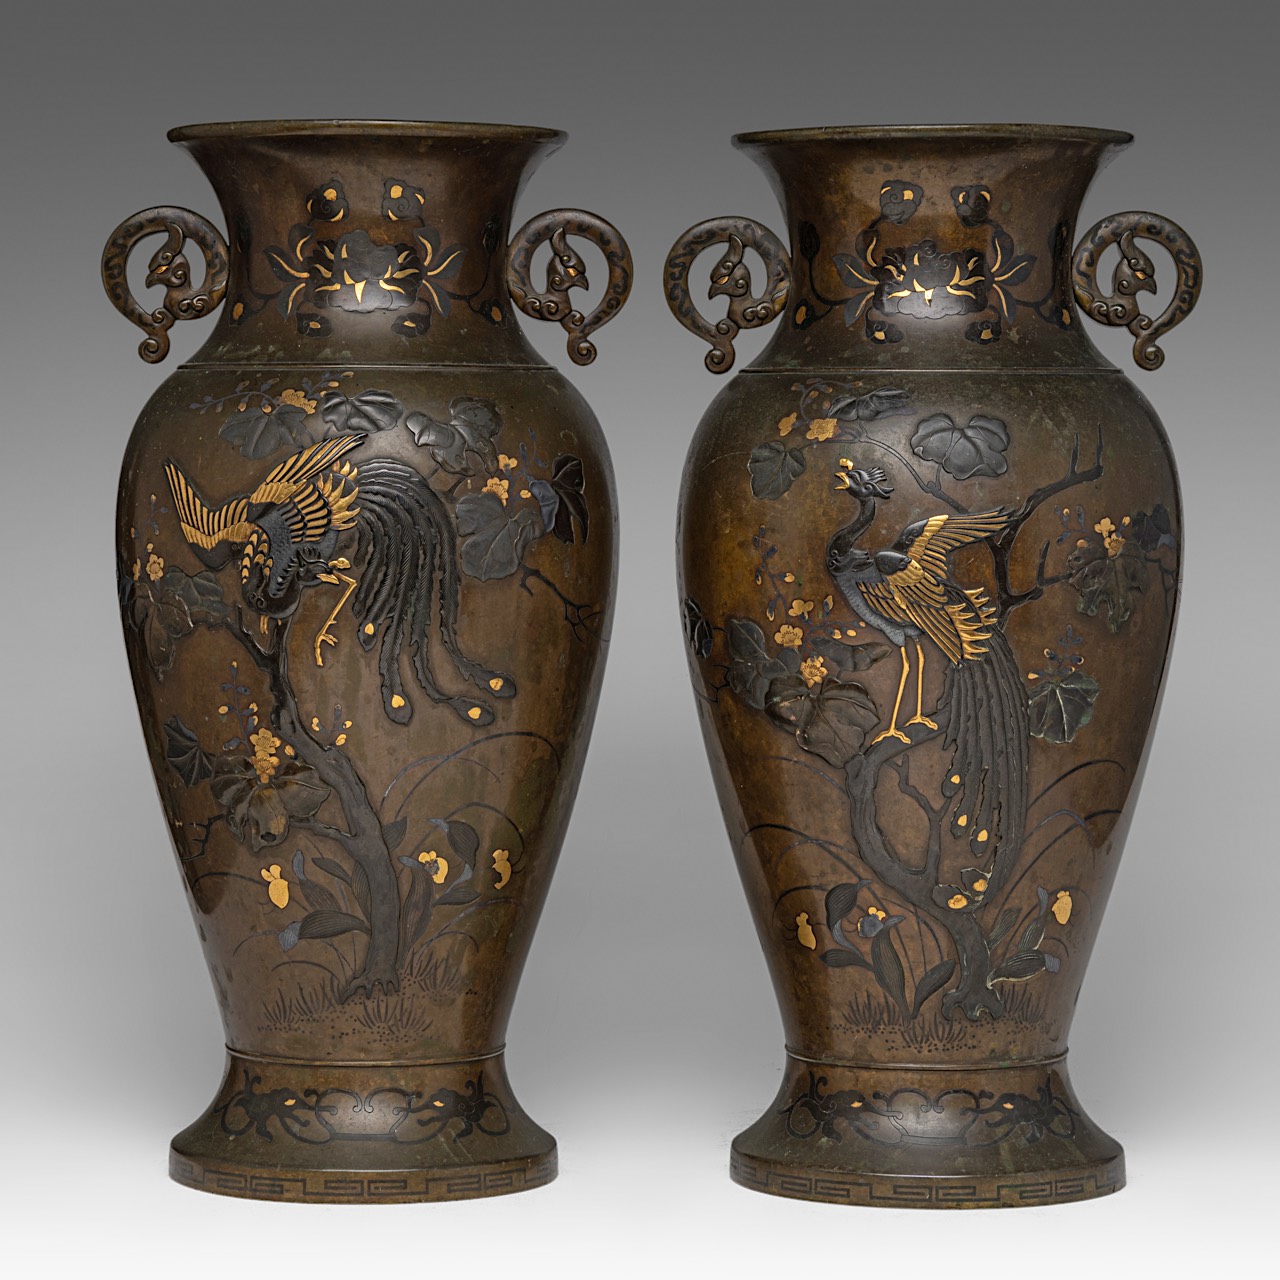 A pair of Japanese bronze 'Phoenix' vases with gilt details, Meiji period (1868-1912), both H 41,5 c